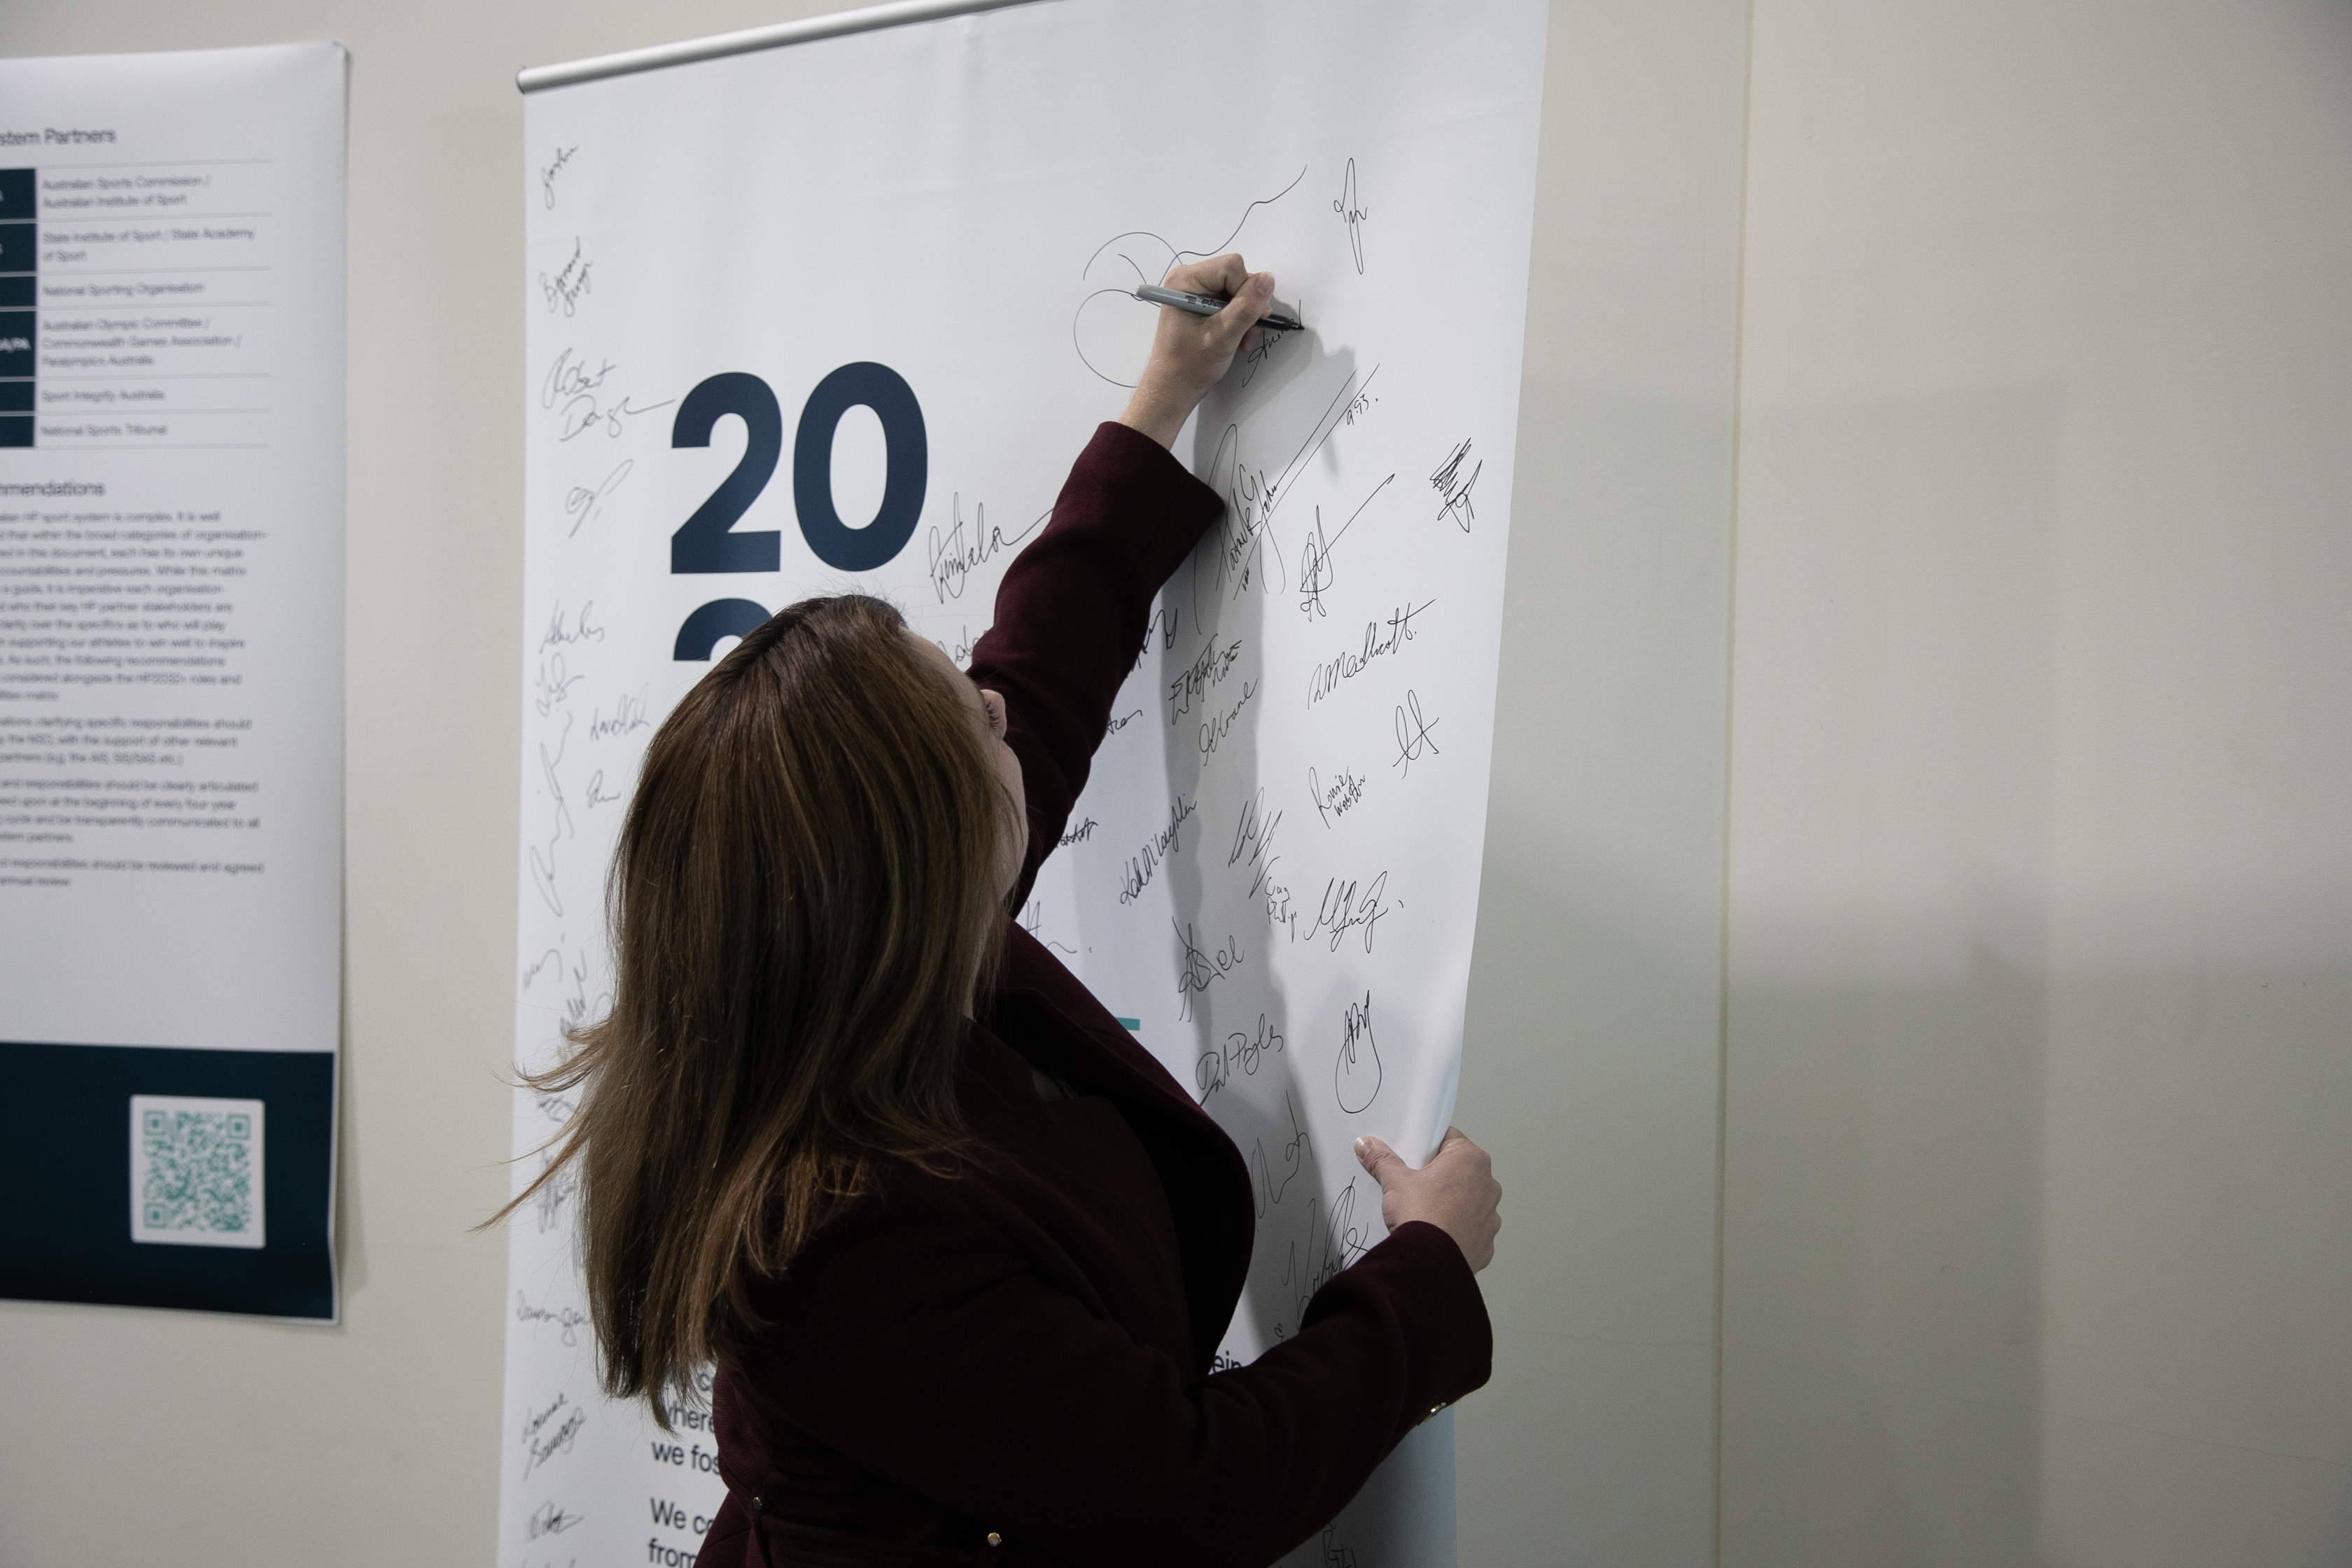 The Minister for Sport, the Hon Anika Wells, signs the Win Well Pledge while at the HP2032+ Strategy Forum at the AIS in Canberra.